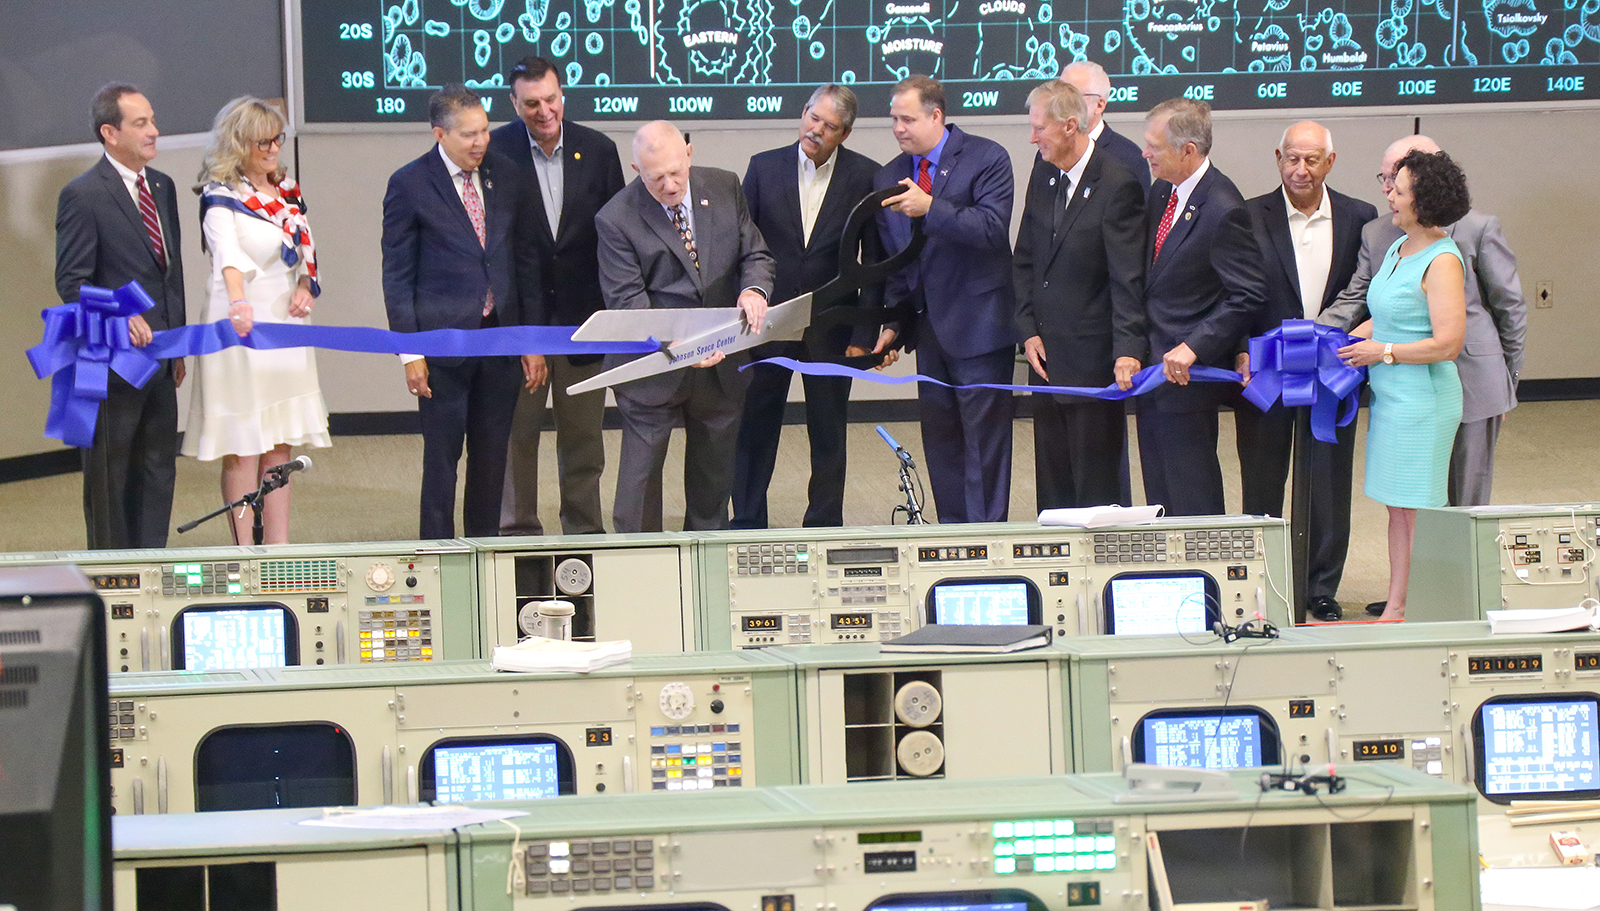 Gene Kranz, flight director for the Apollo 11 mission, cuts the ribbon of the newly restored Apollo Mission Control Center at the Space Center Houston on June 28, 2019. Harris (left of Kranz) led the restoration efforts. (Photo by Space Center Houston.)